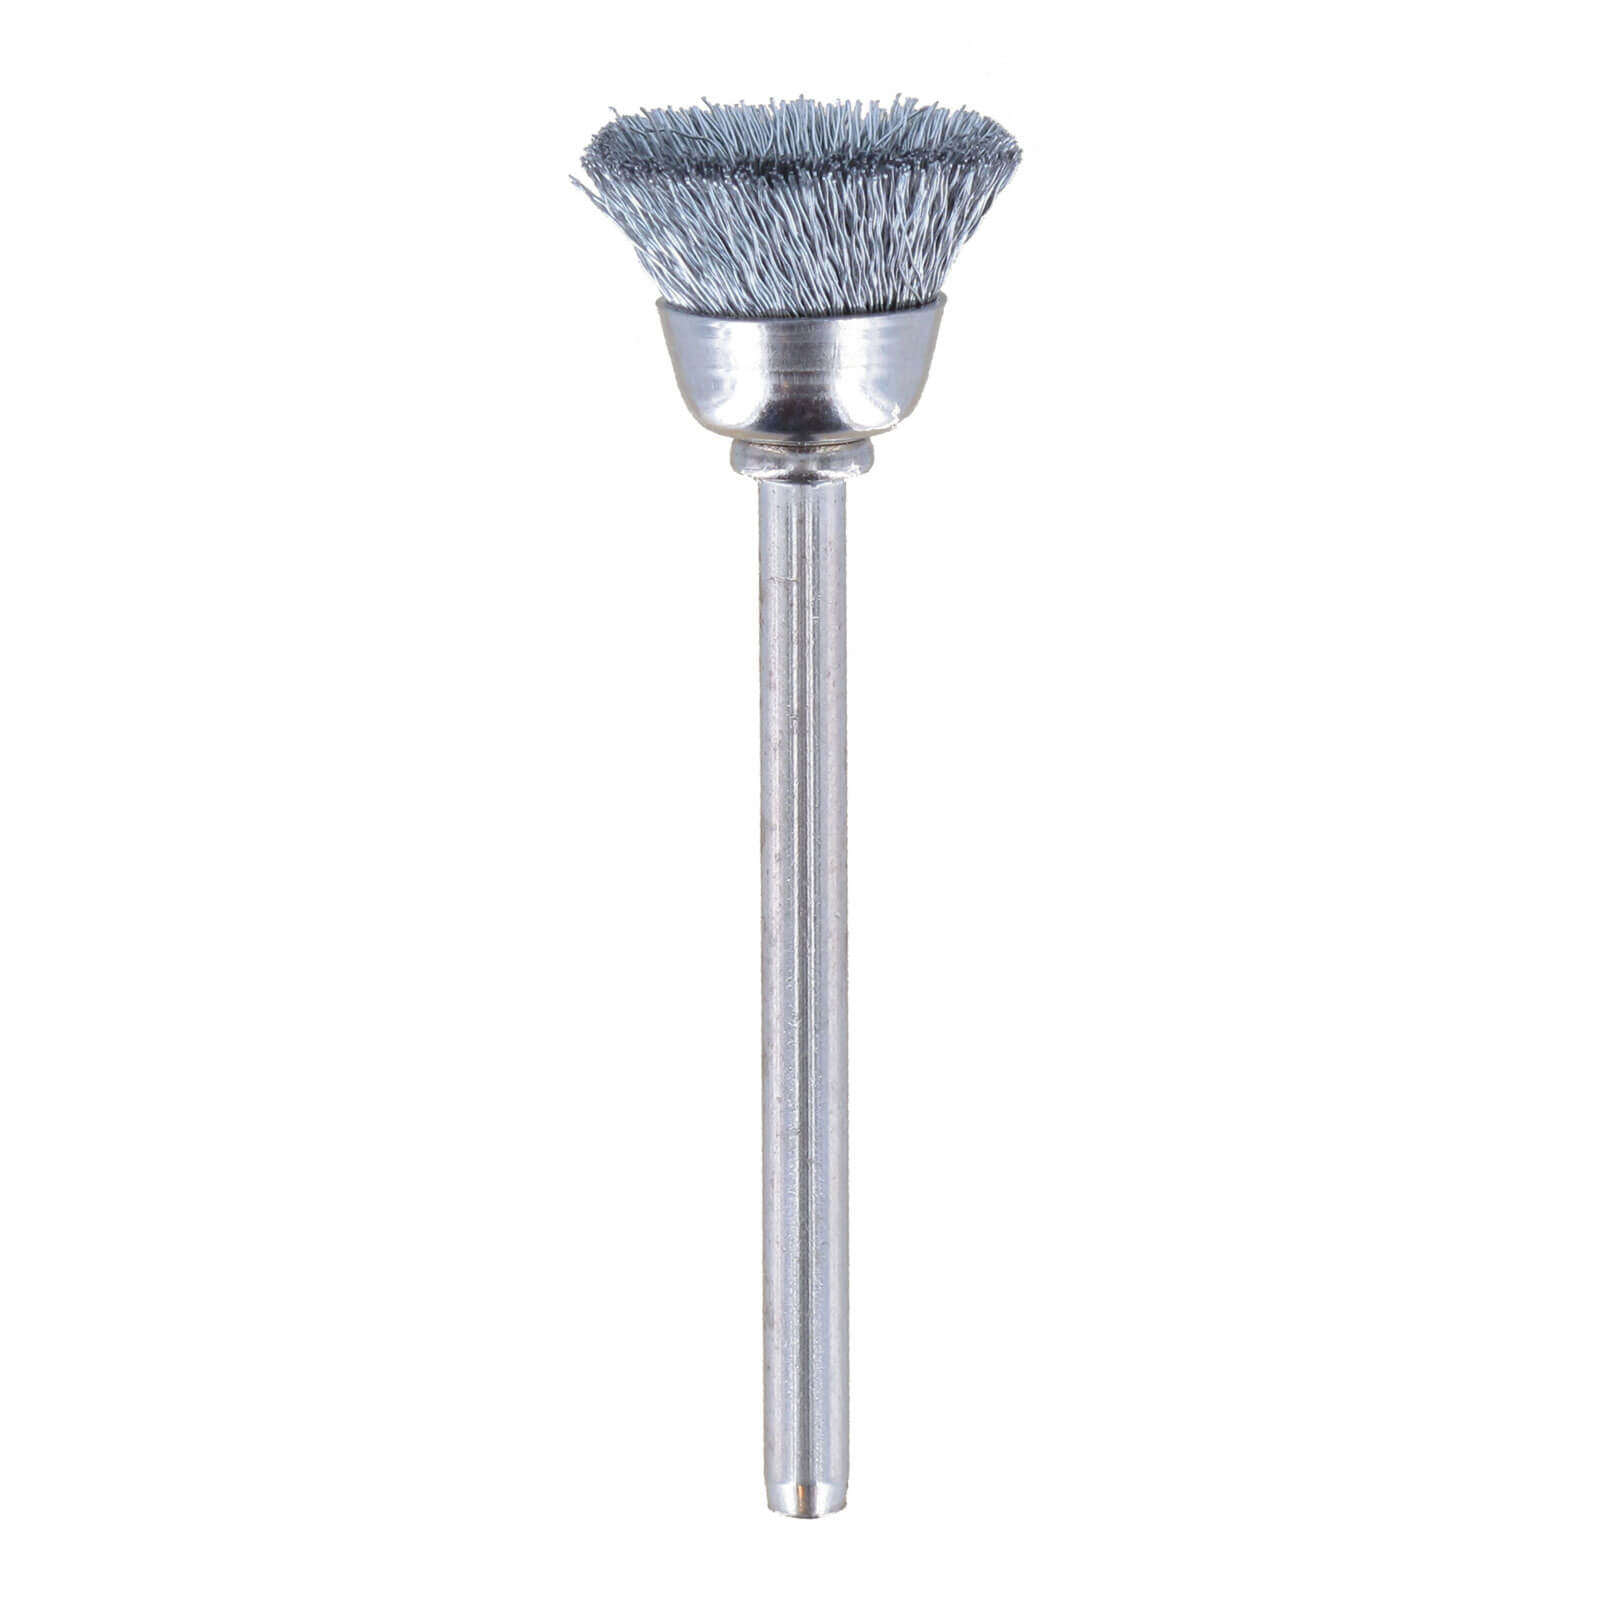 Image of Dremel 442 Carbon Steel Wire Cup Brush 13mm Pack of 2